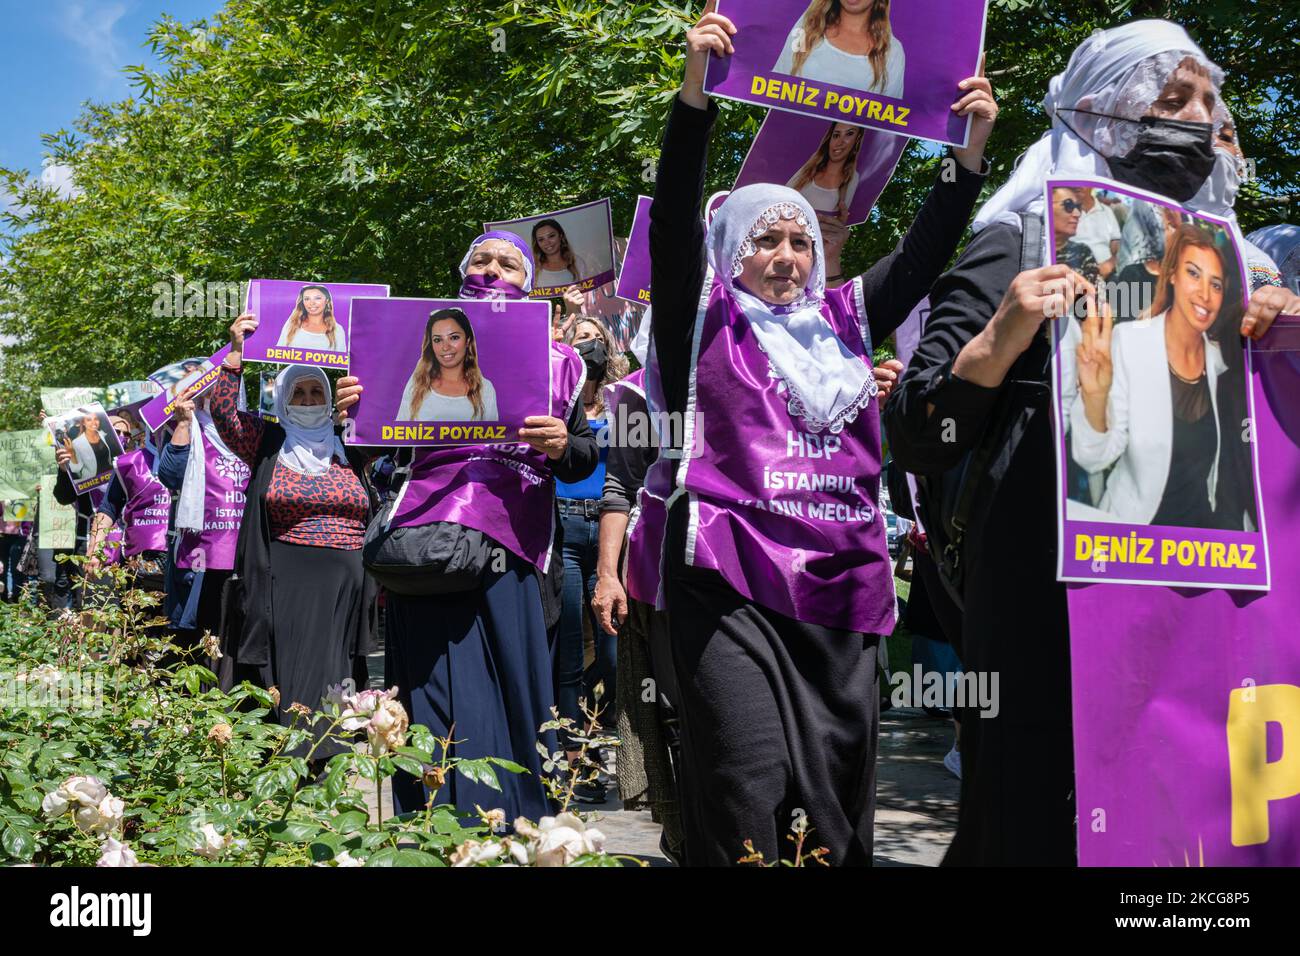 On 19 June, 2021, thousands of Turkish women from different cities gathered in Maltepe, Istanbul, to rally in support of the Istanbul Convention, a European treaty preventing and combating violence against women, from which the Turkish government withdrew in 2021. (Photo by Diego Cupolo/NurPhoto) Stock Photo